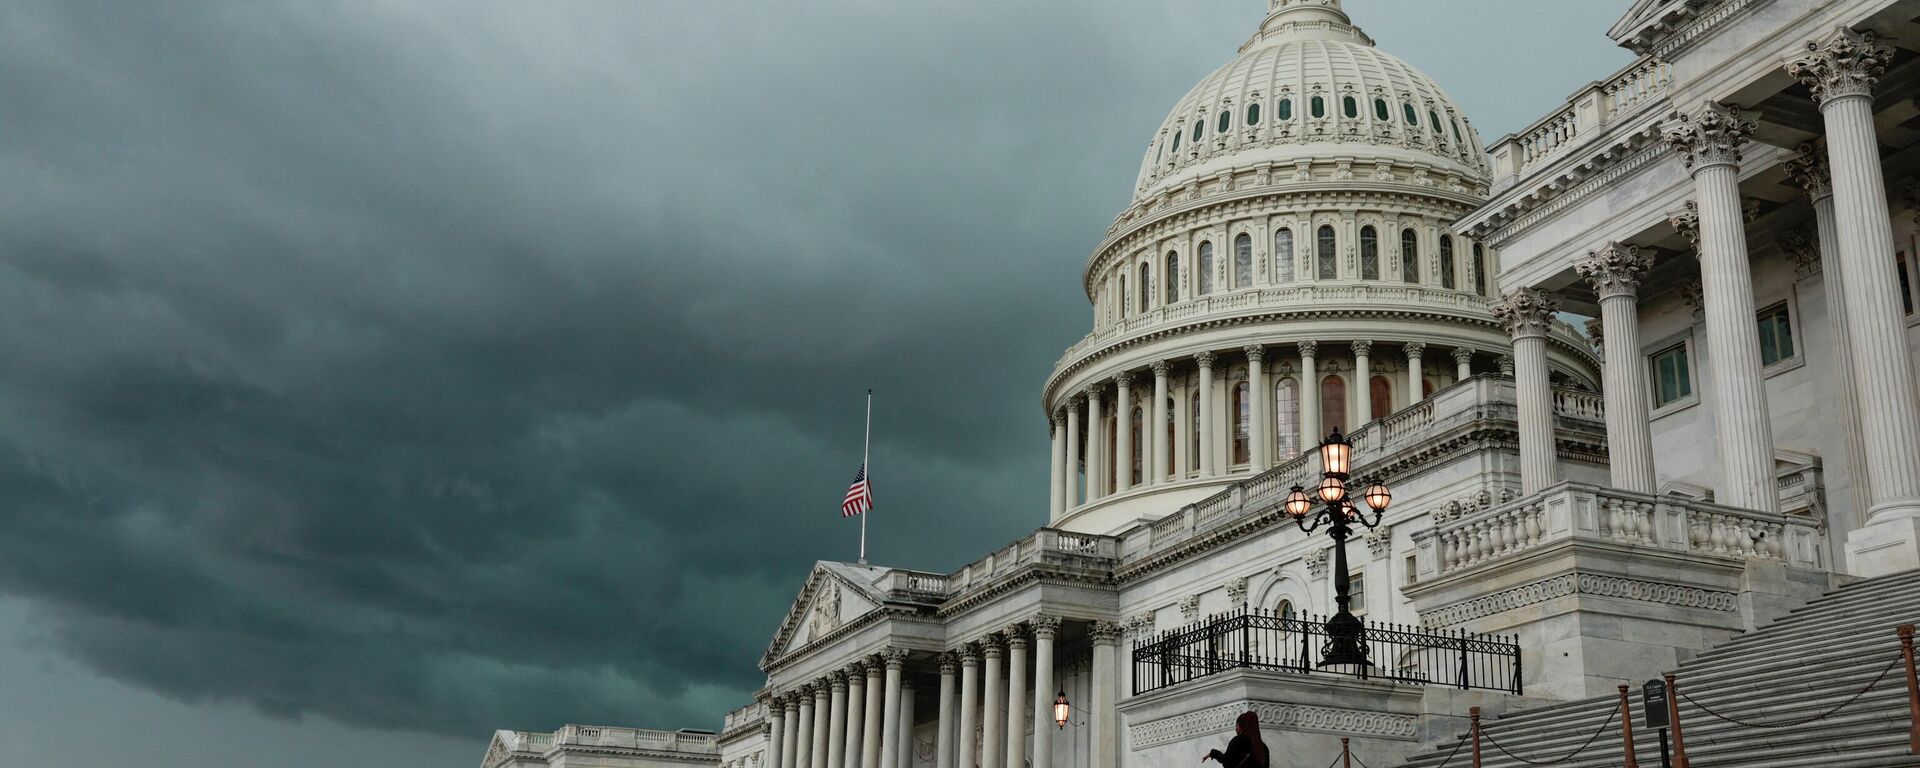 A storm cloud hangs over the U.S. Capitol Building on May 16, 2022 in Washington, DC - Sputnik International, 1920, 17.09.2022